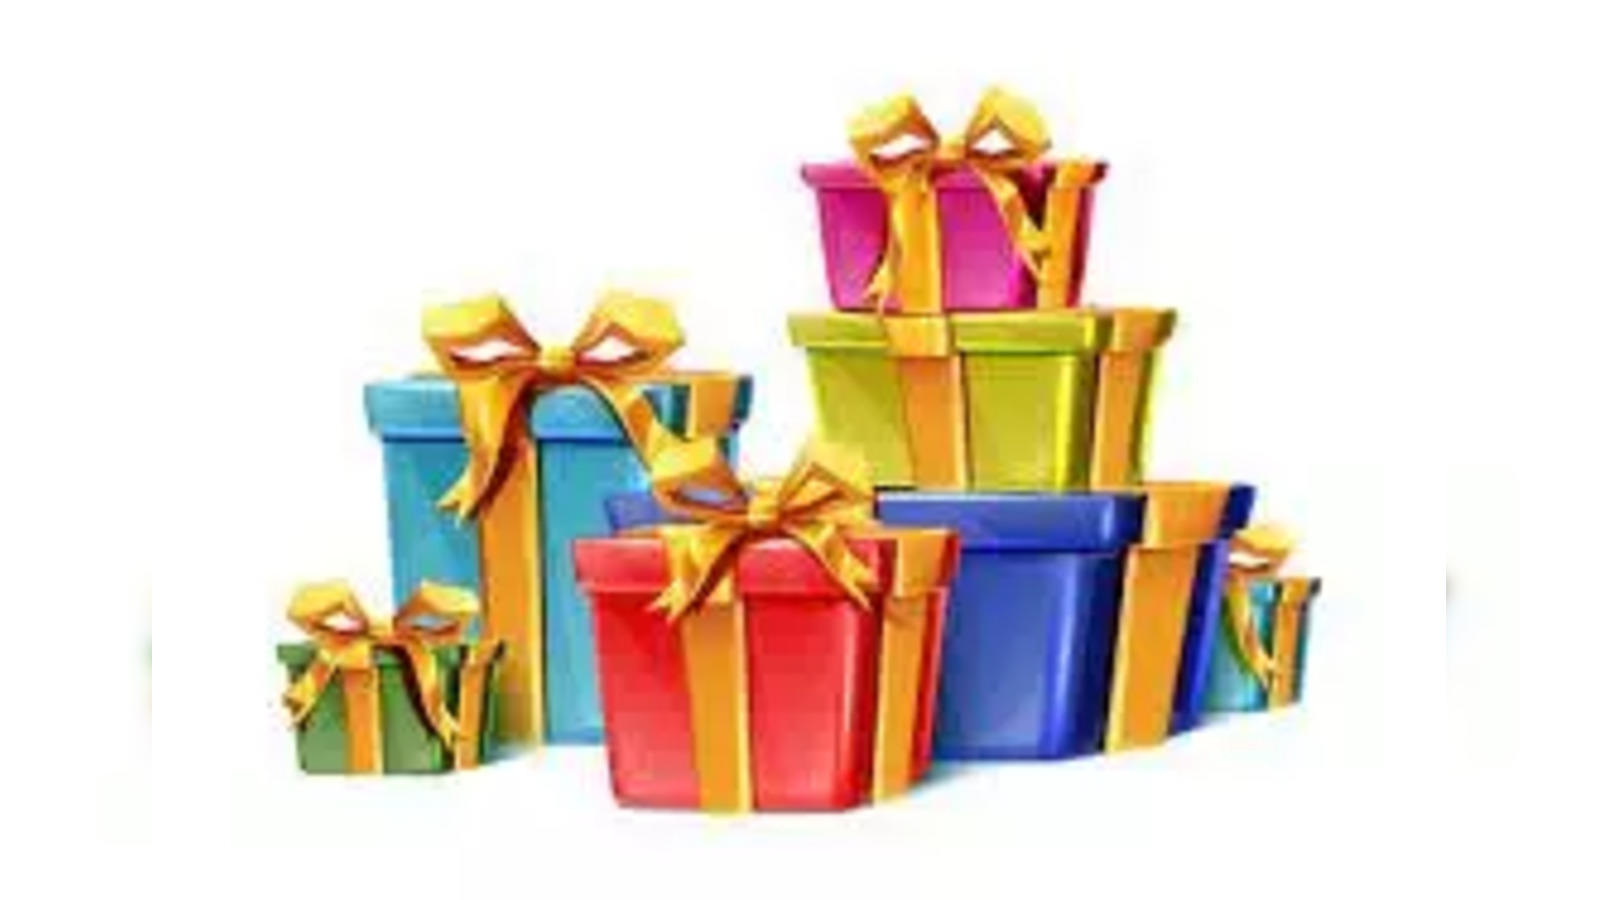 Corporate Diwali Gift Basket – Between Boxes Gifts